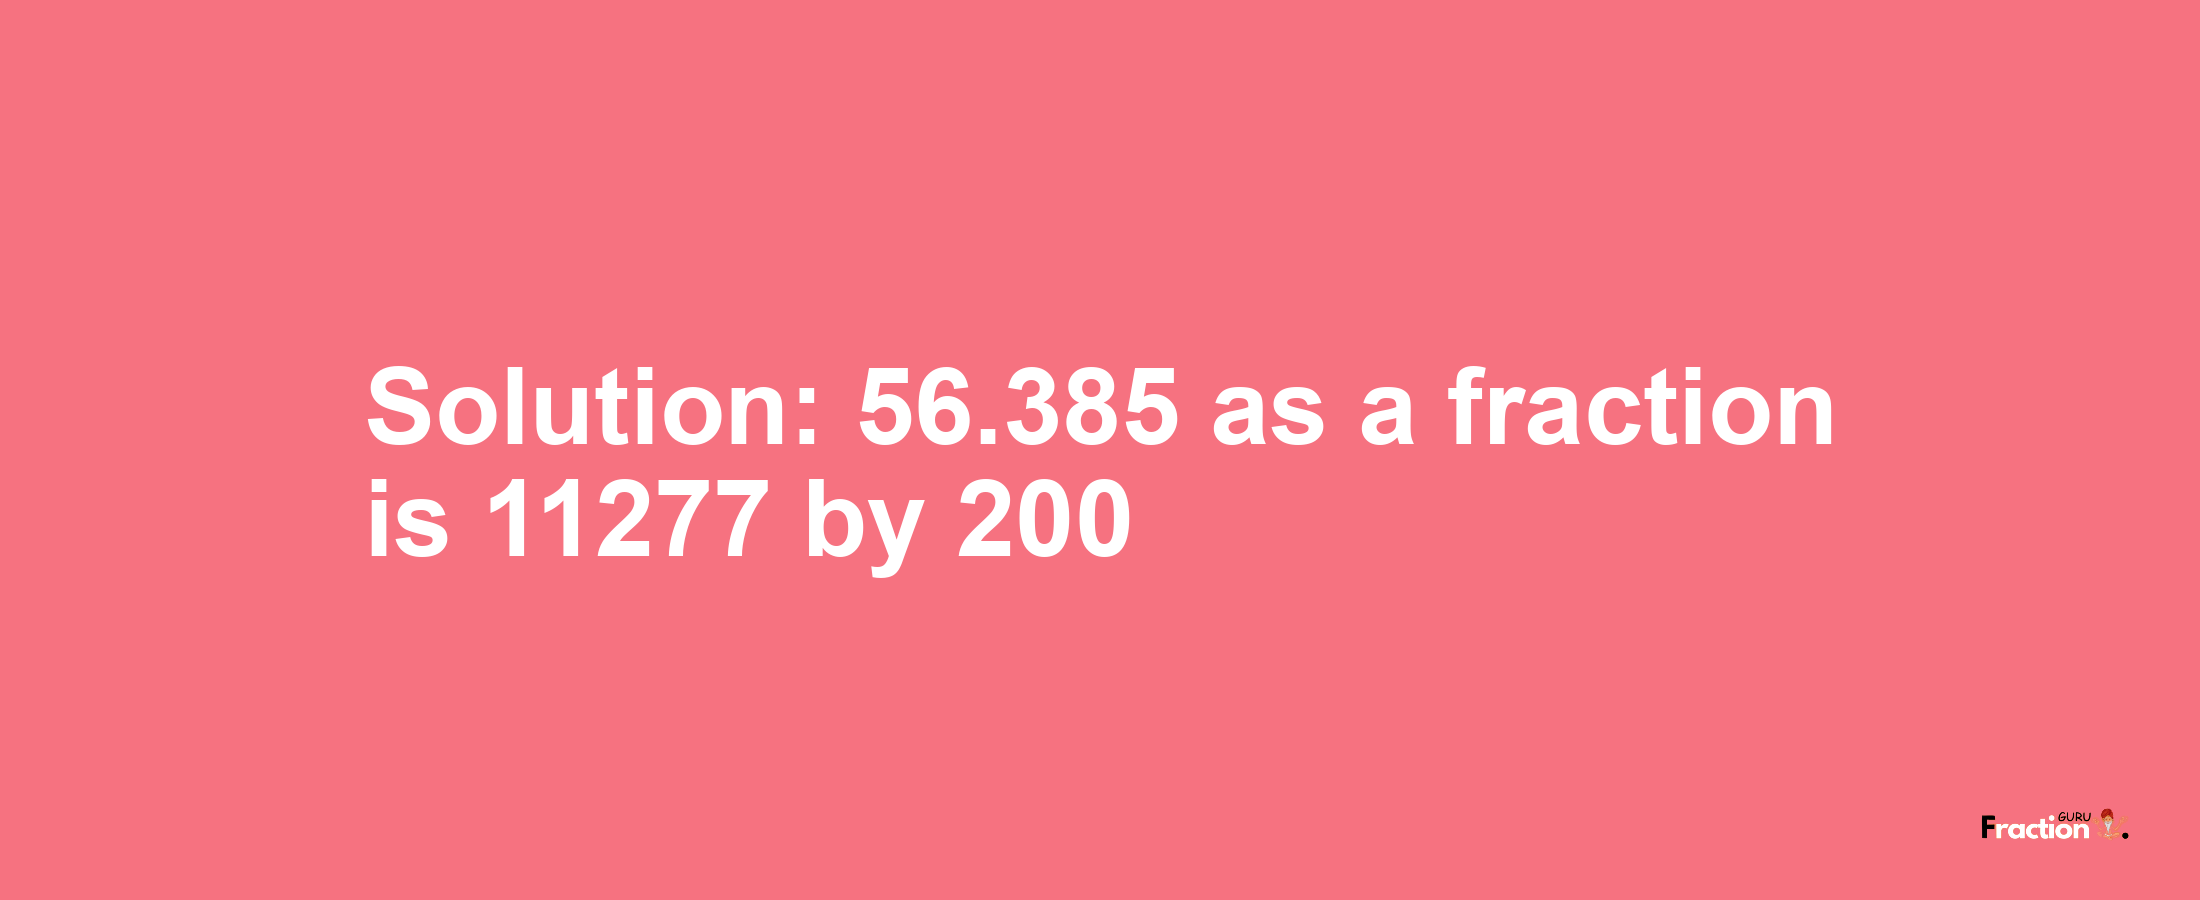 Solution:56.385 as a fraction is 11277/200